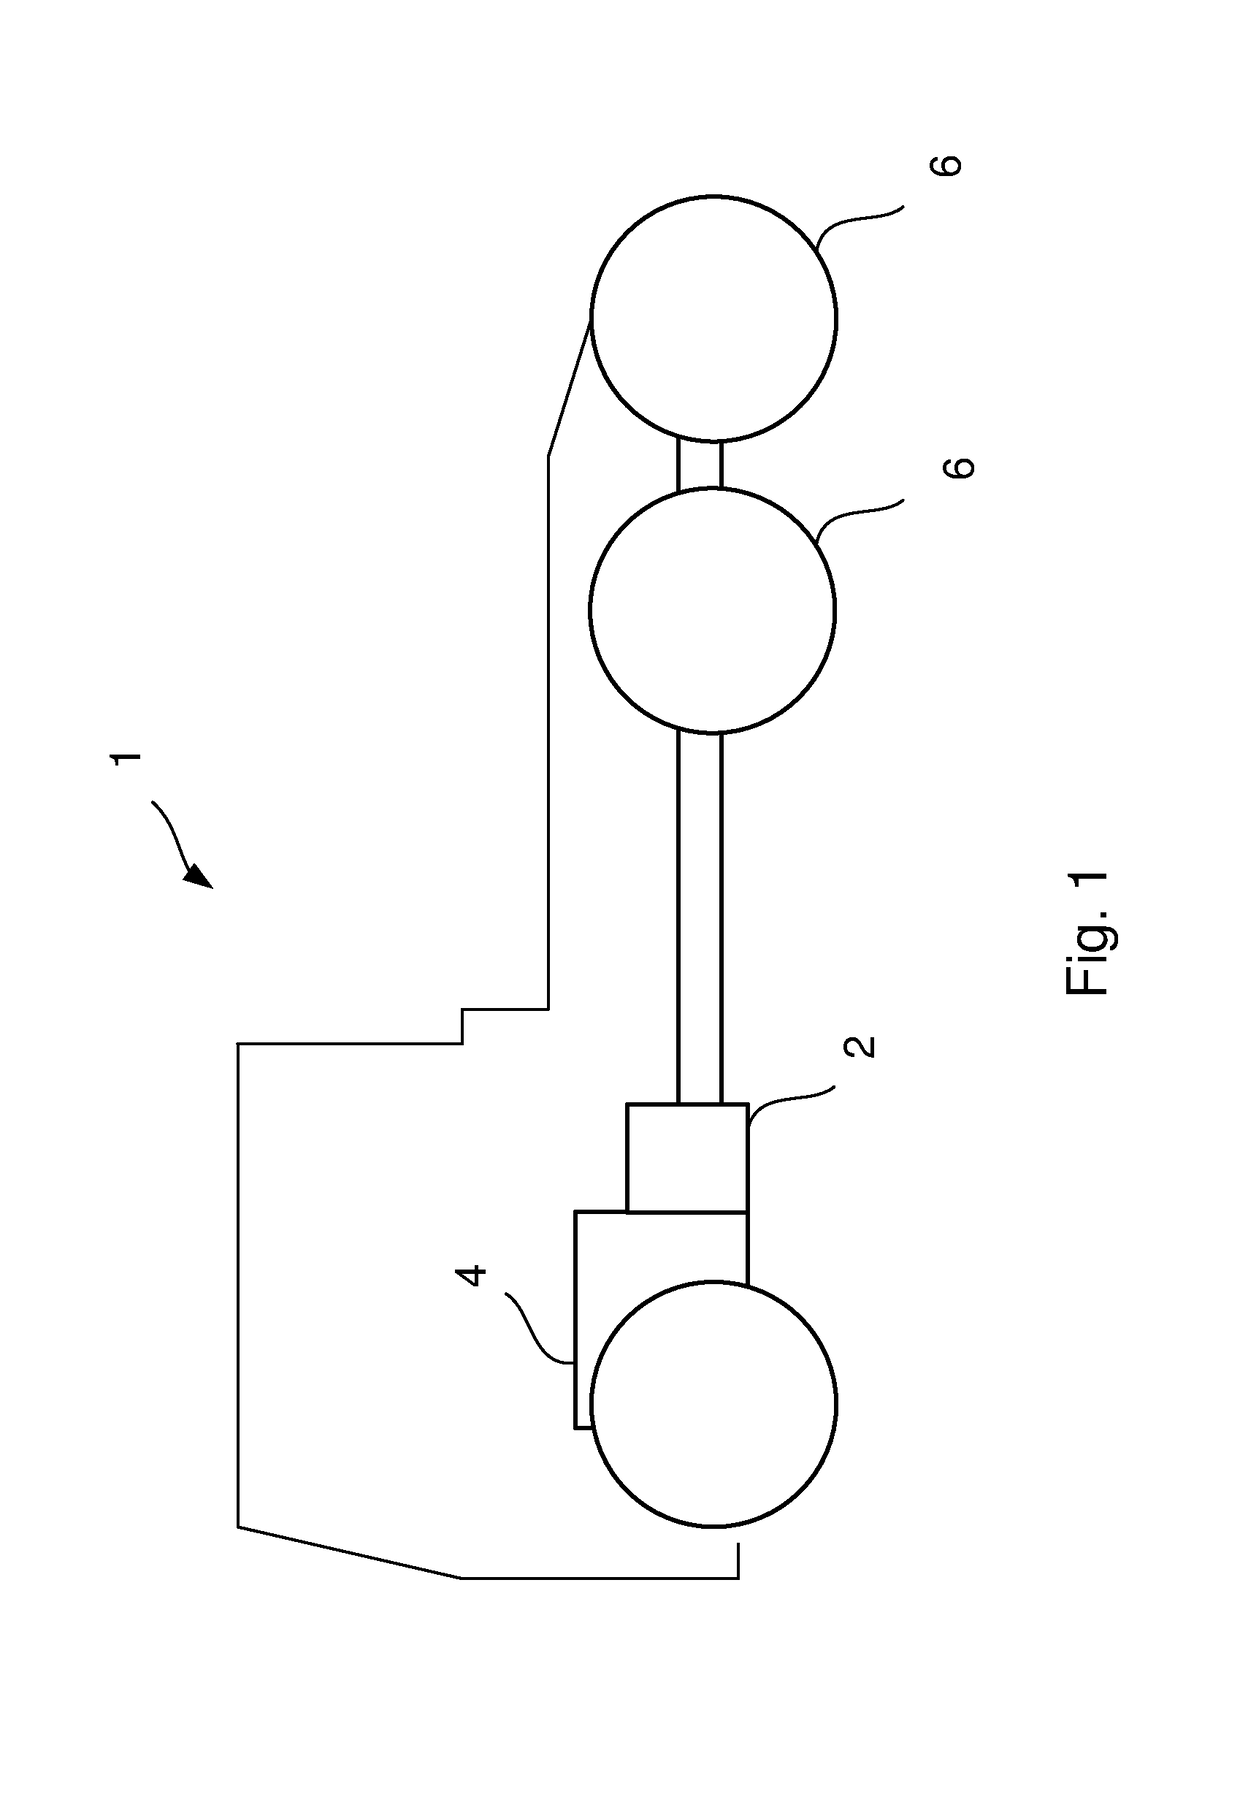 Gearbox for a hybrid powetrain and method to control the gearbox